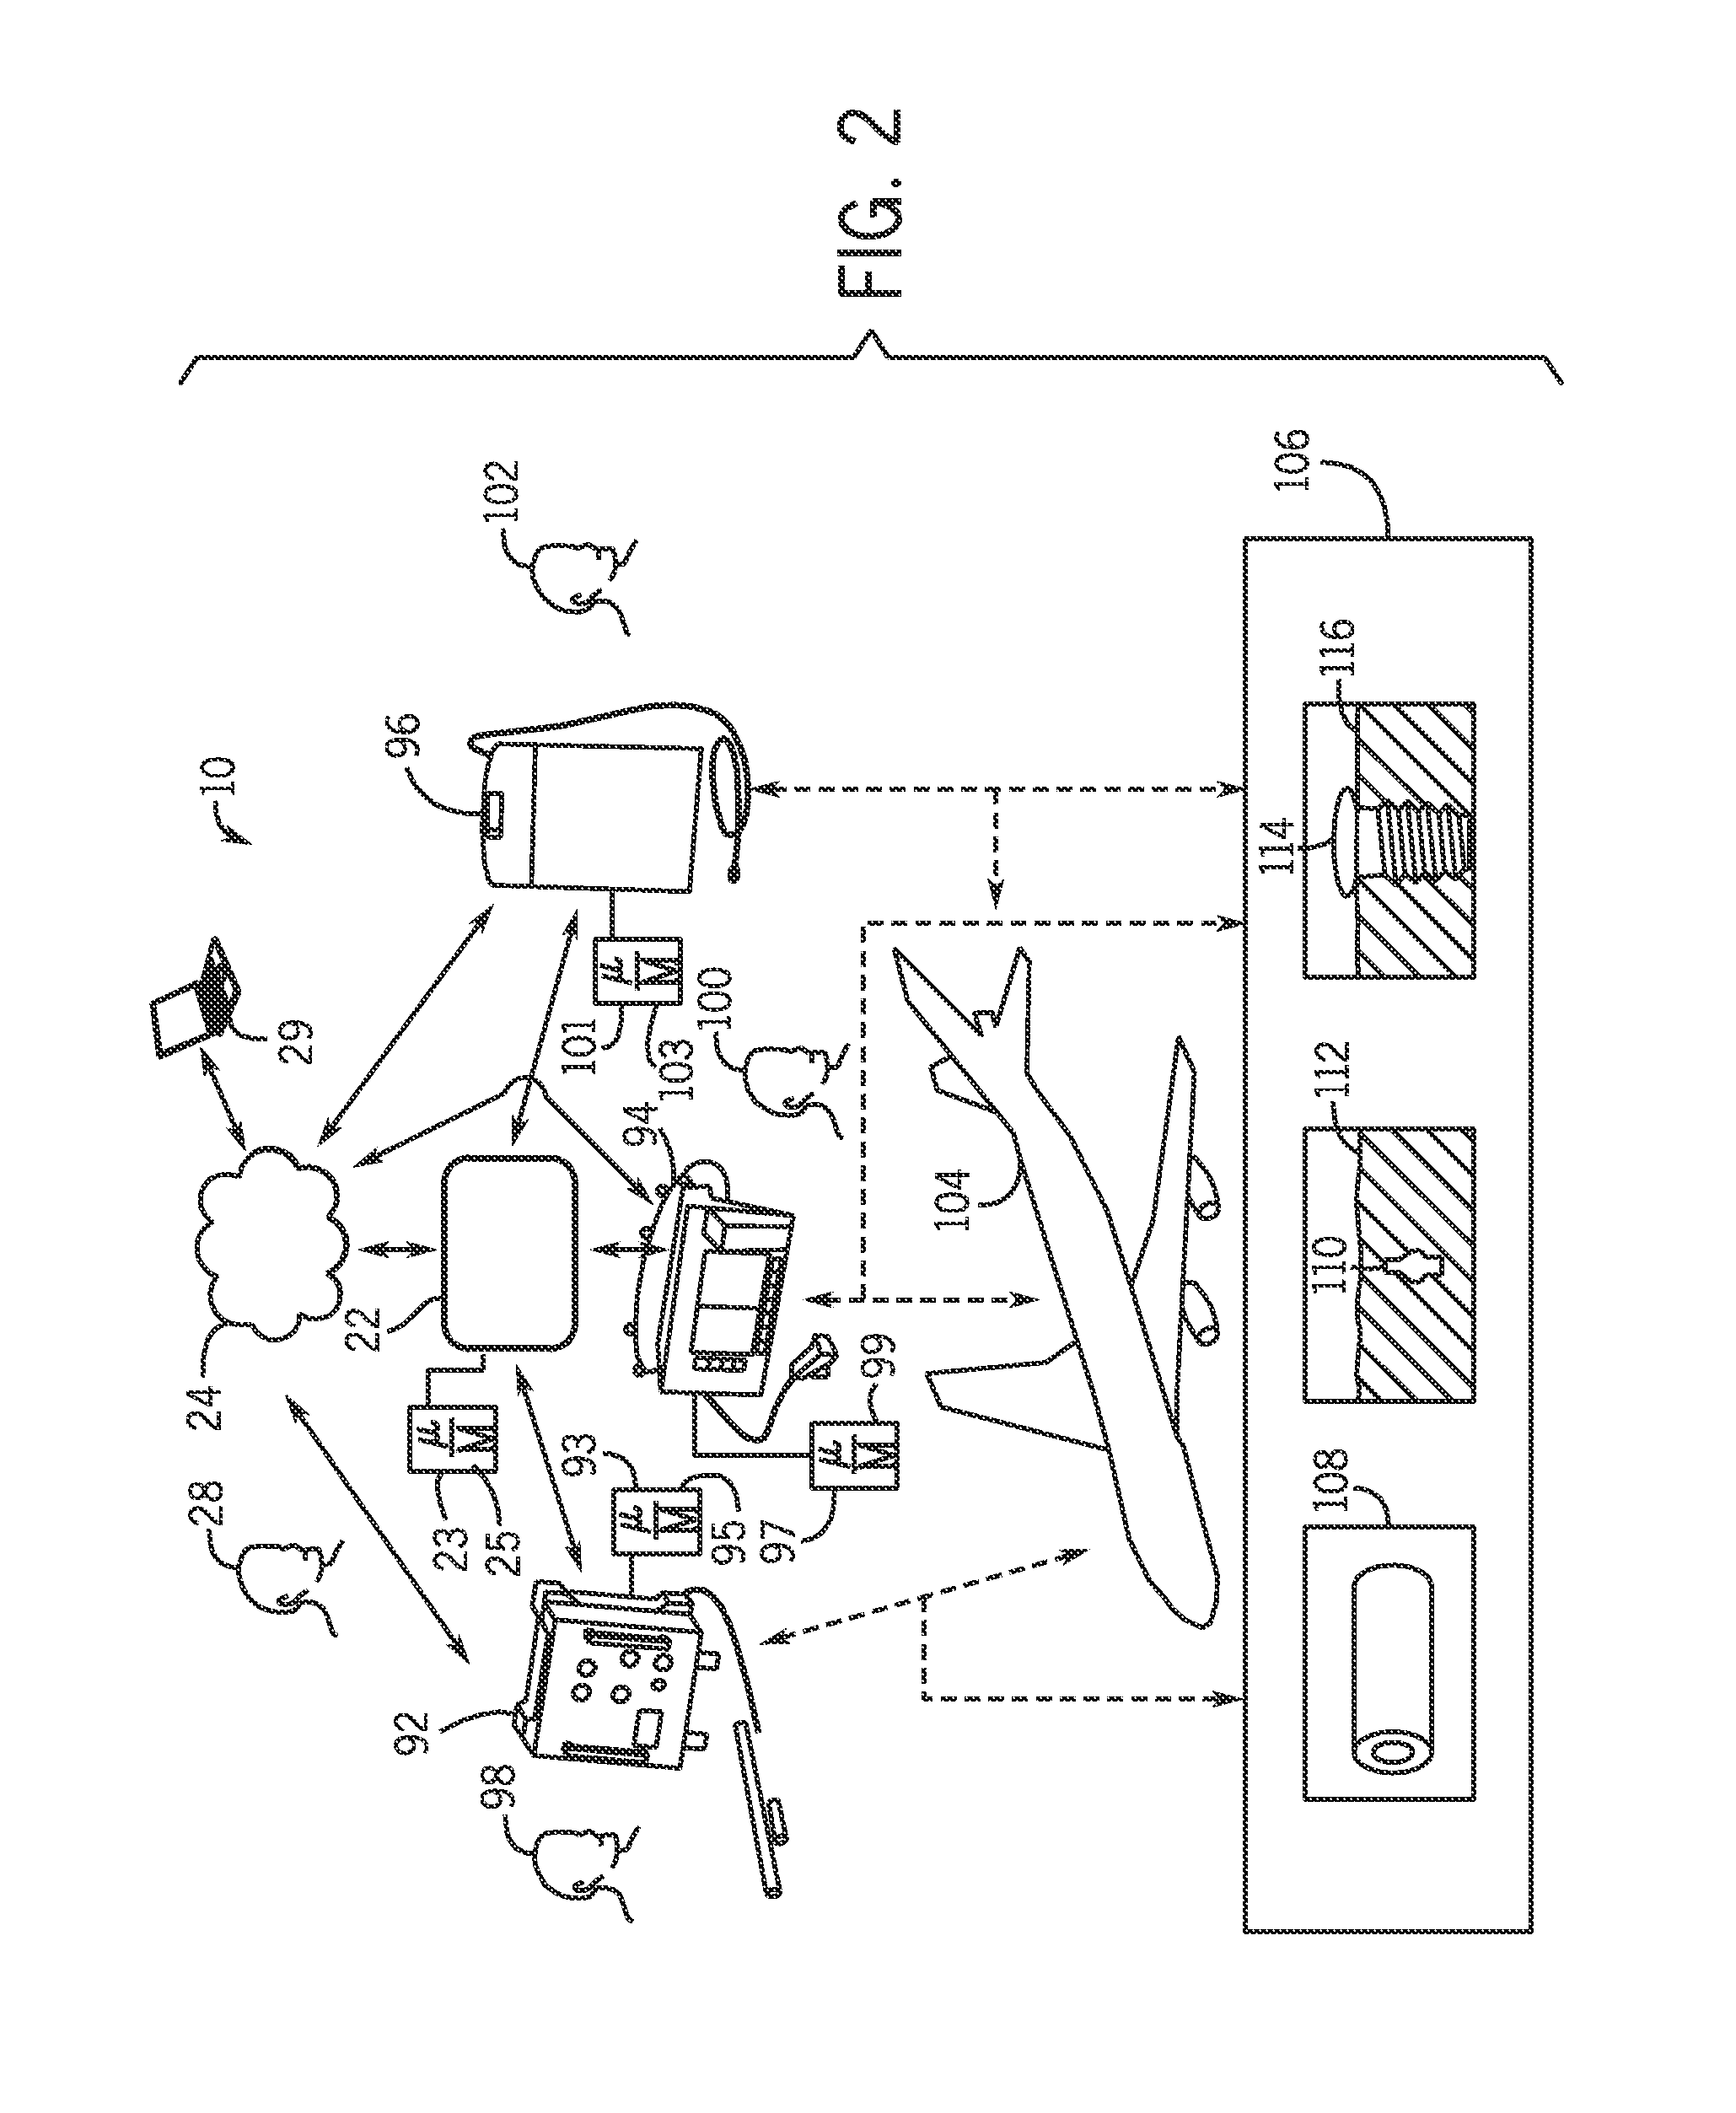 Systems and methods for analyzing data in a non-destructive testing system